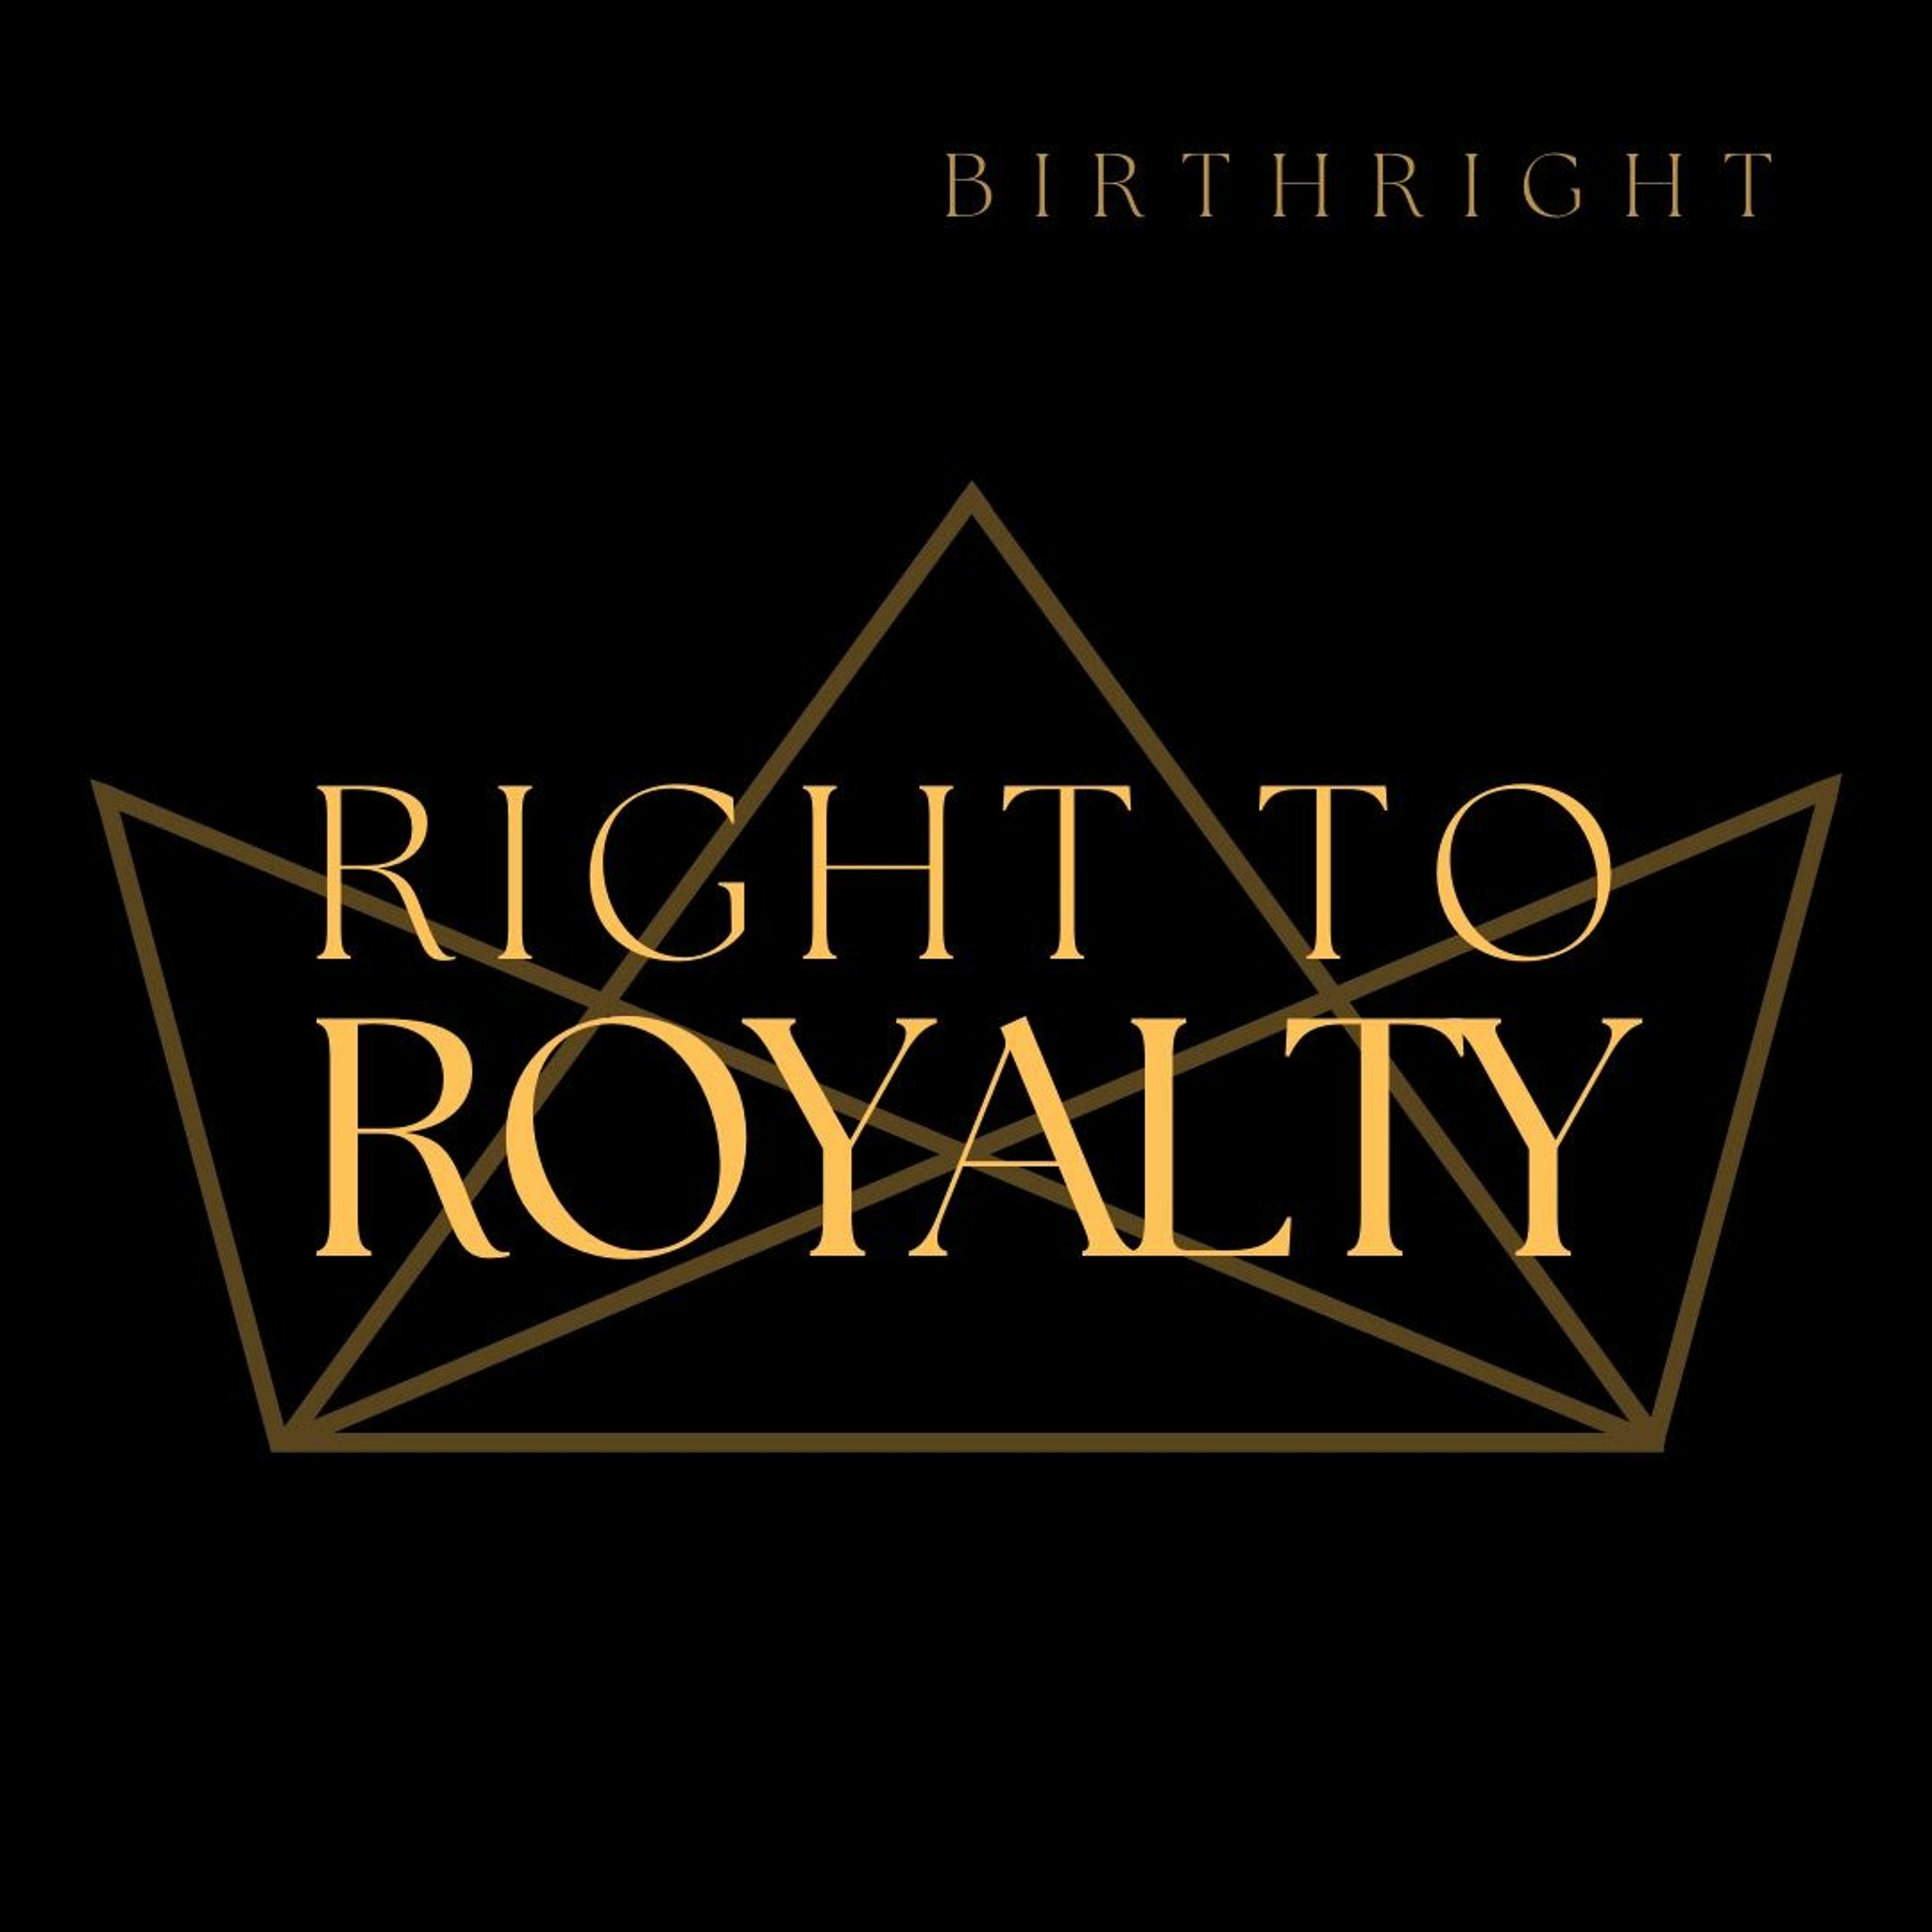 Right to Royalty - Birthright | Derek Quinby